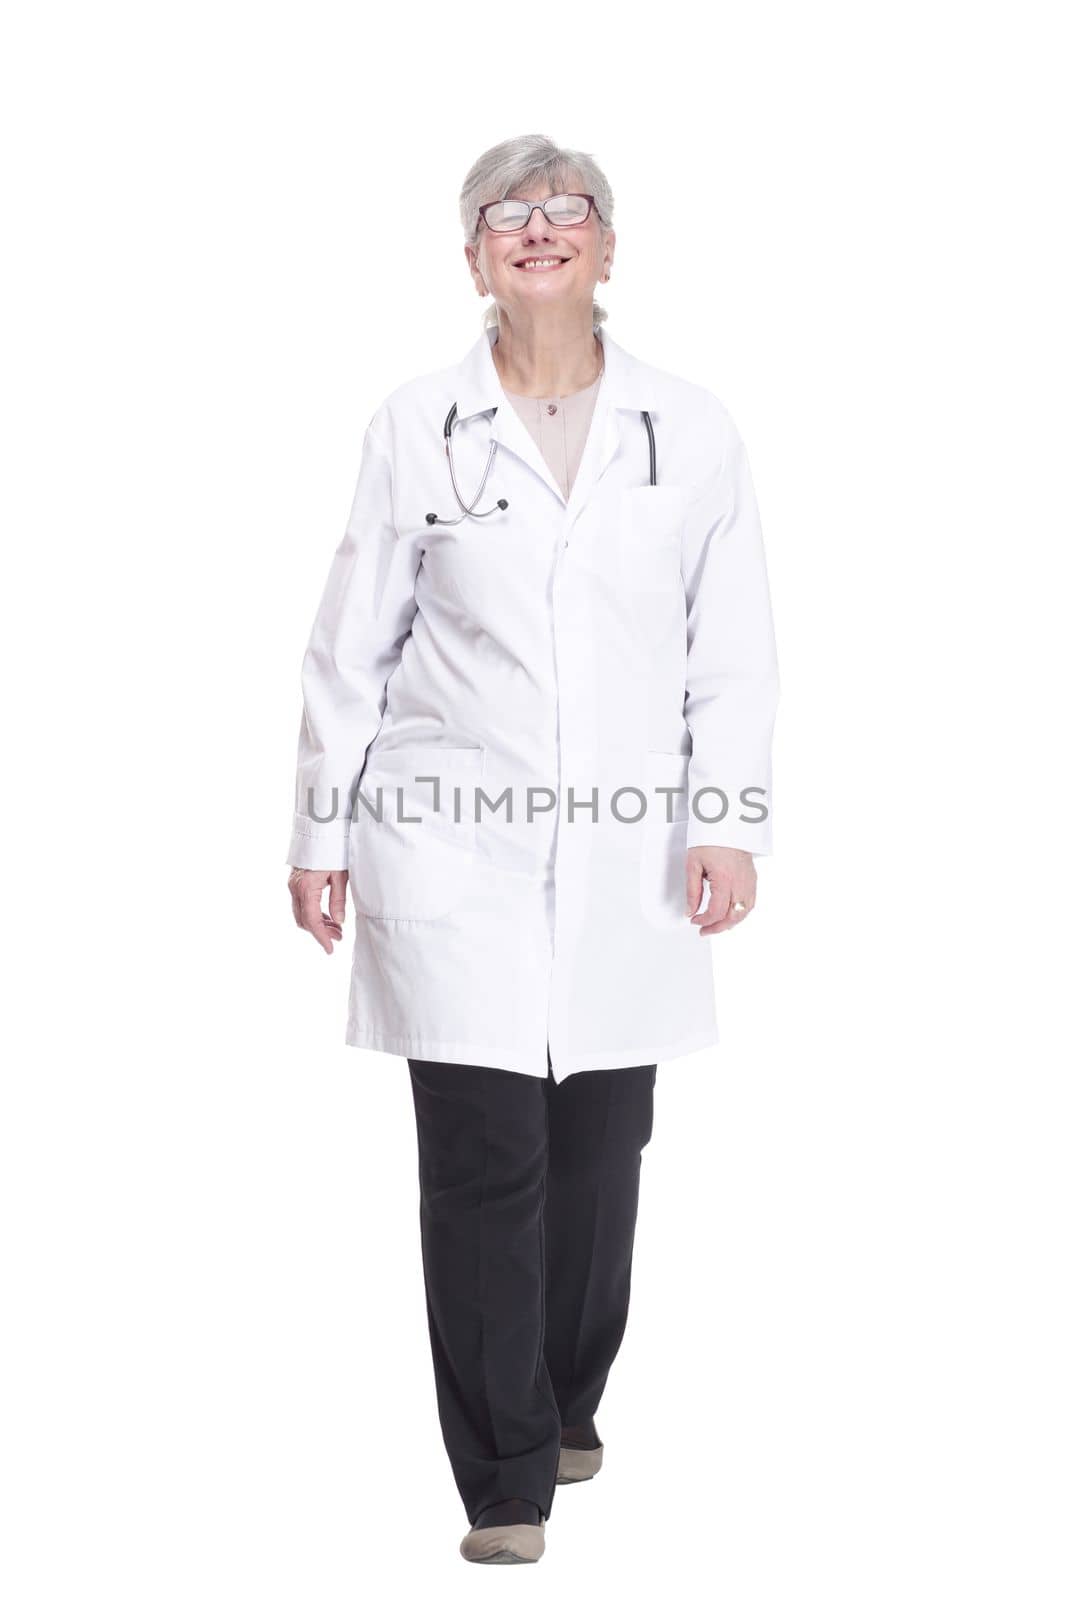 happy woman doctor striding forward. isolated on a white background. by asdf